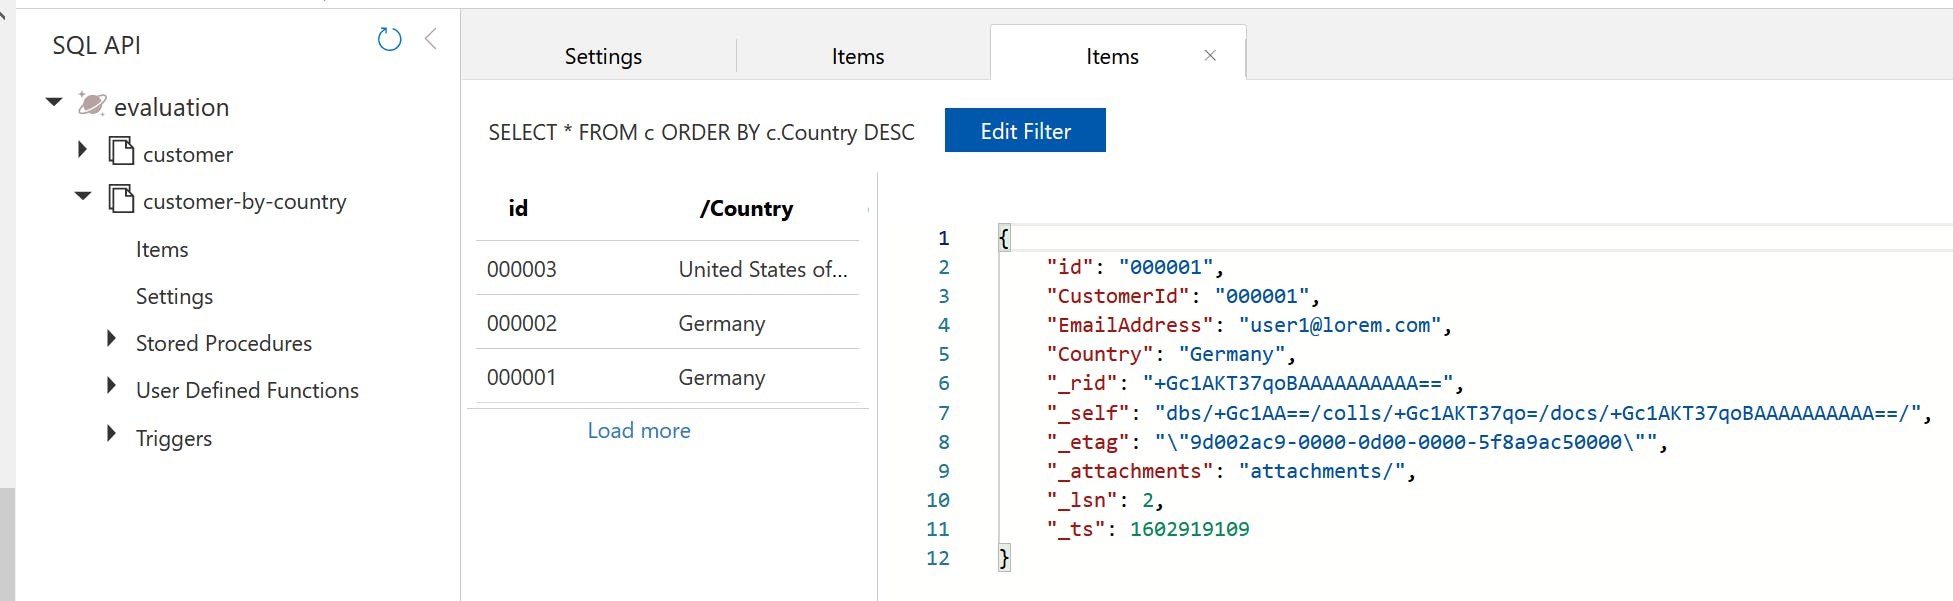 cosmosdb-customer-by-country-items.png